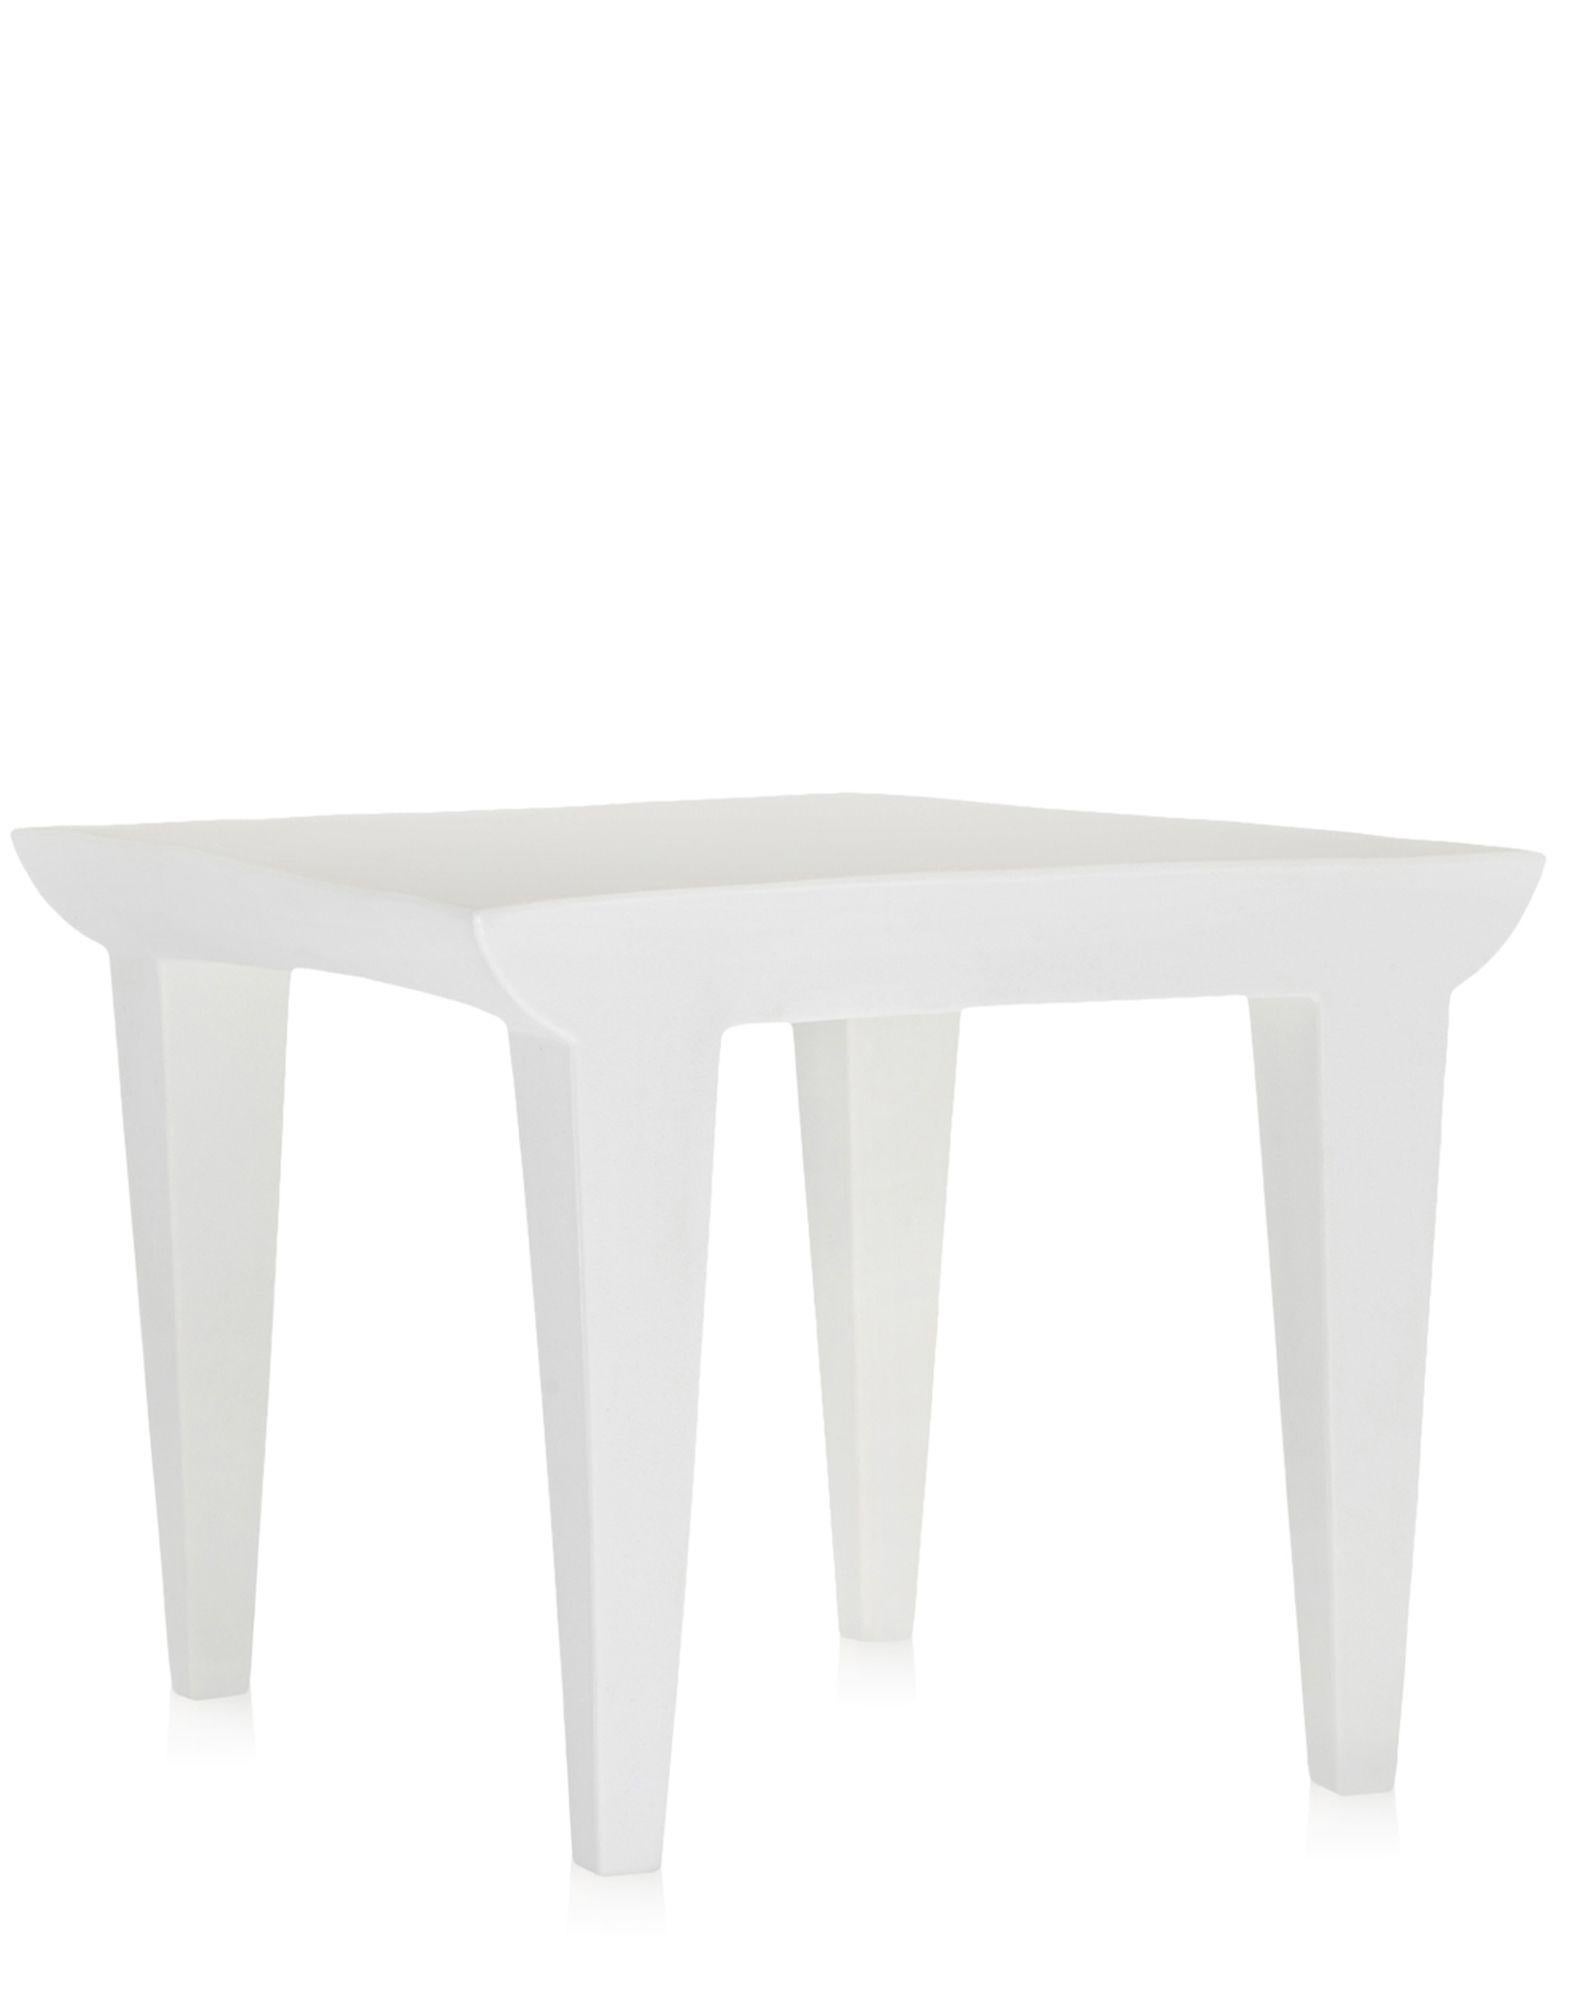 Bubble club side table in zinc white.

Dimensions: Height 30.75 in, width 23.65 in, depth 29.5 in.; Unit weight: 5.5 kg. Made of: Polyethylene. Outdoor use.